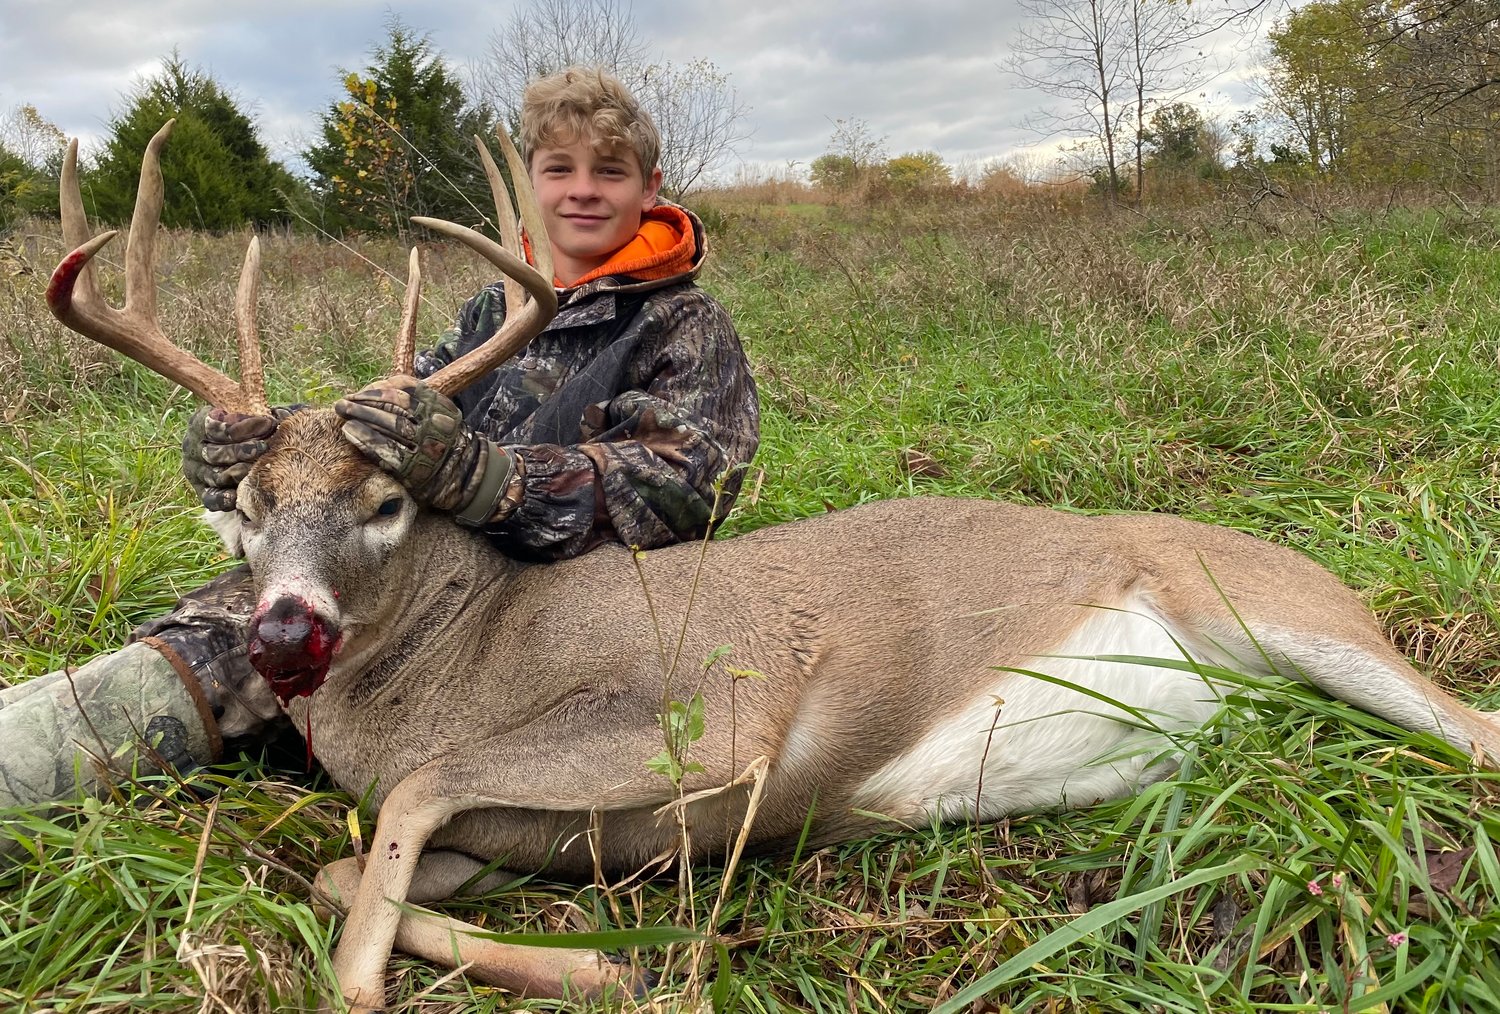 Luke Moore, 12, son of Brian and Kim Moore, brought down an 8-point buck with a 6.5 Creedmoor from 105-yards.